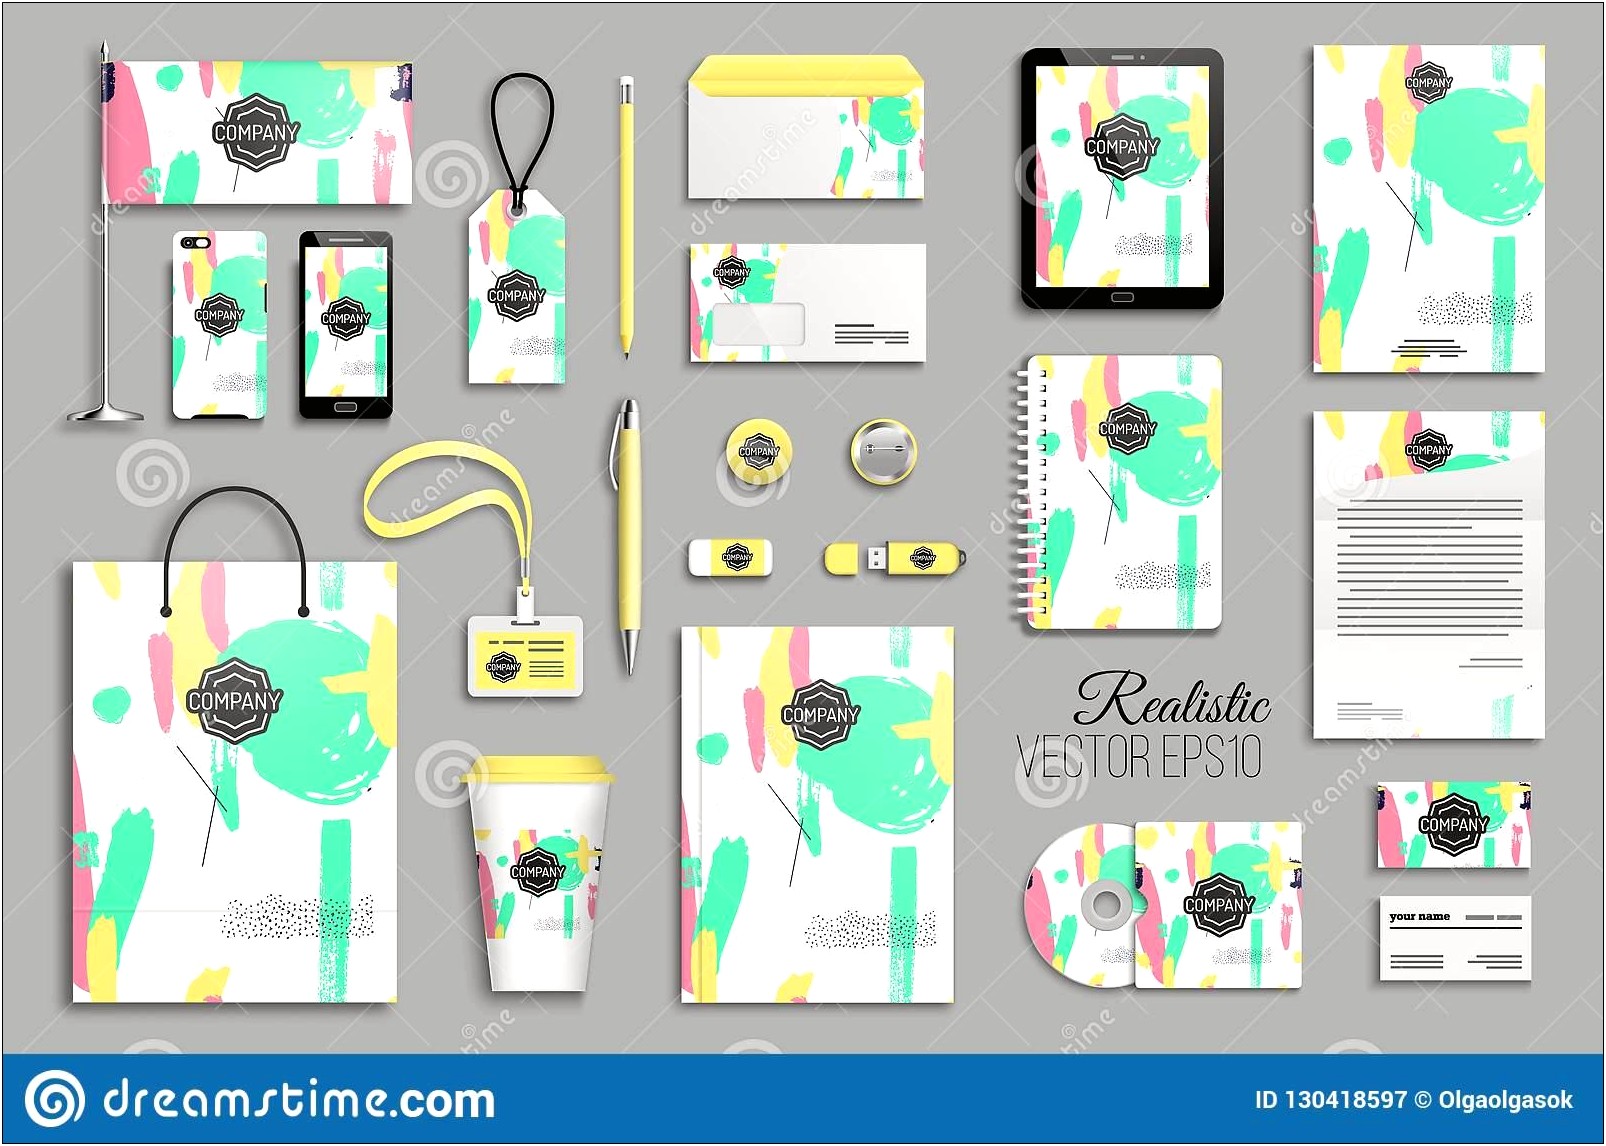 Free Vector Set Of Corporate Identity Templates